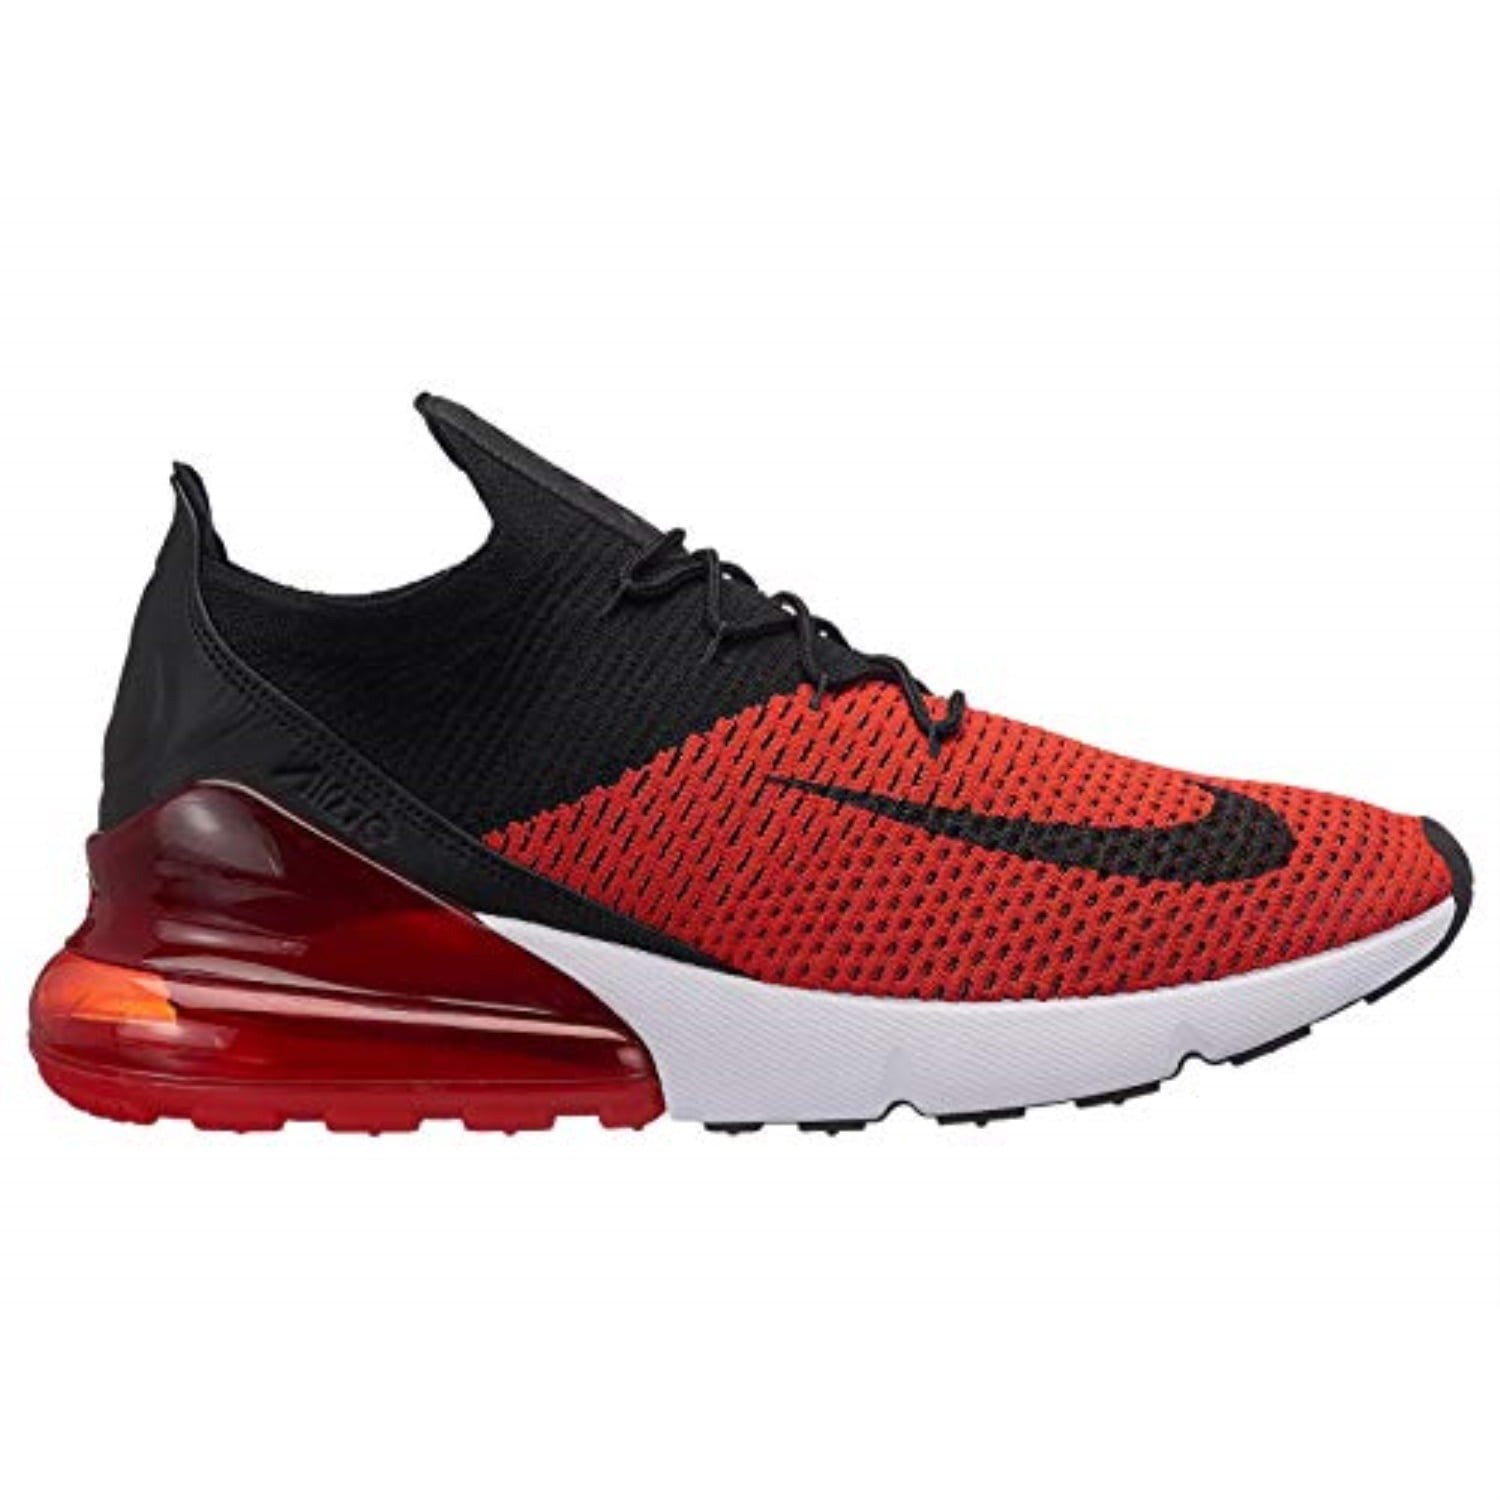 Nike Air Max 270 Flyknit - Men's Chili Red/Black/Challenge Red/White ...